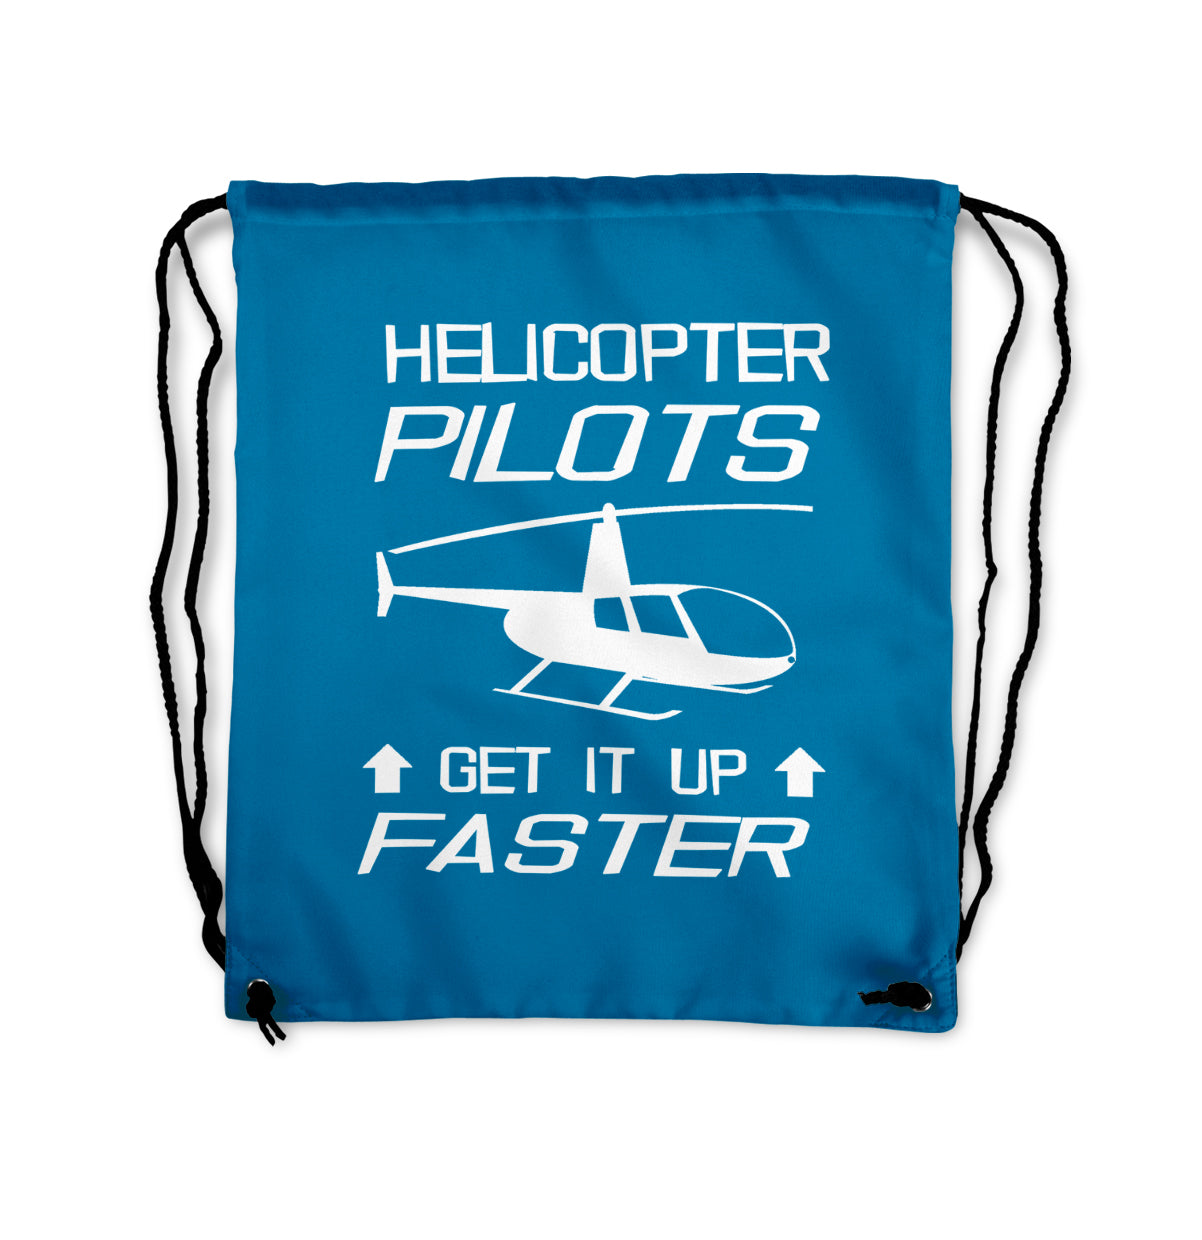 Helicopter Pilots Get It Up Faster Designed Drawstring Bags